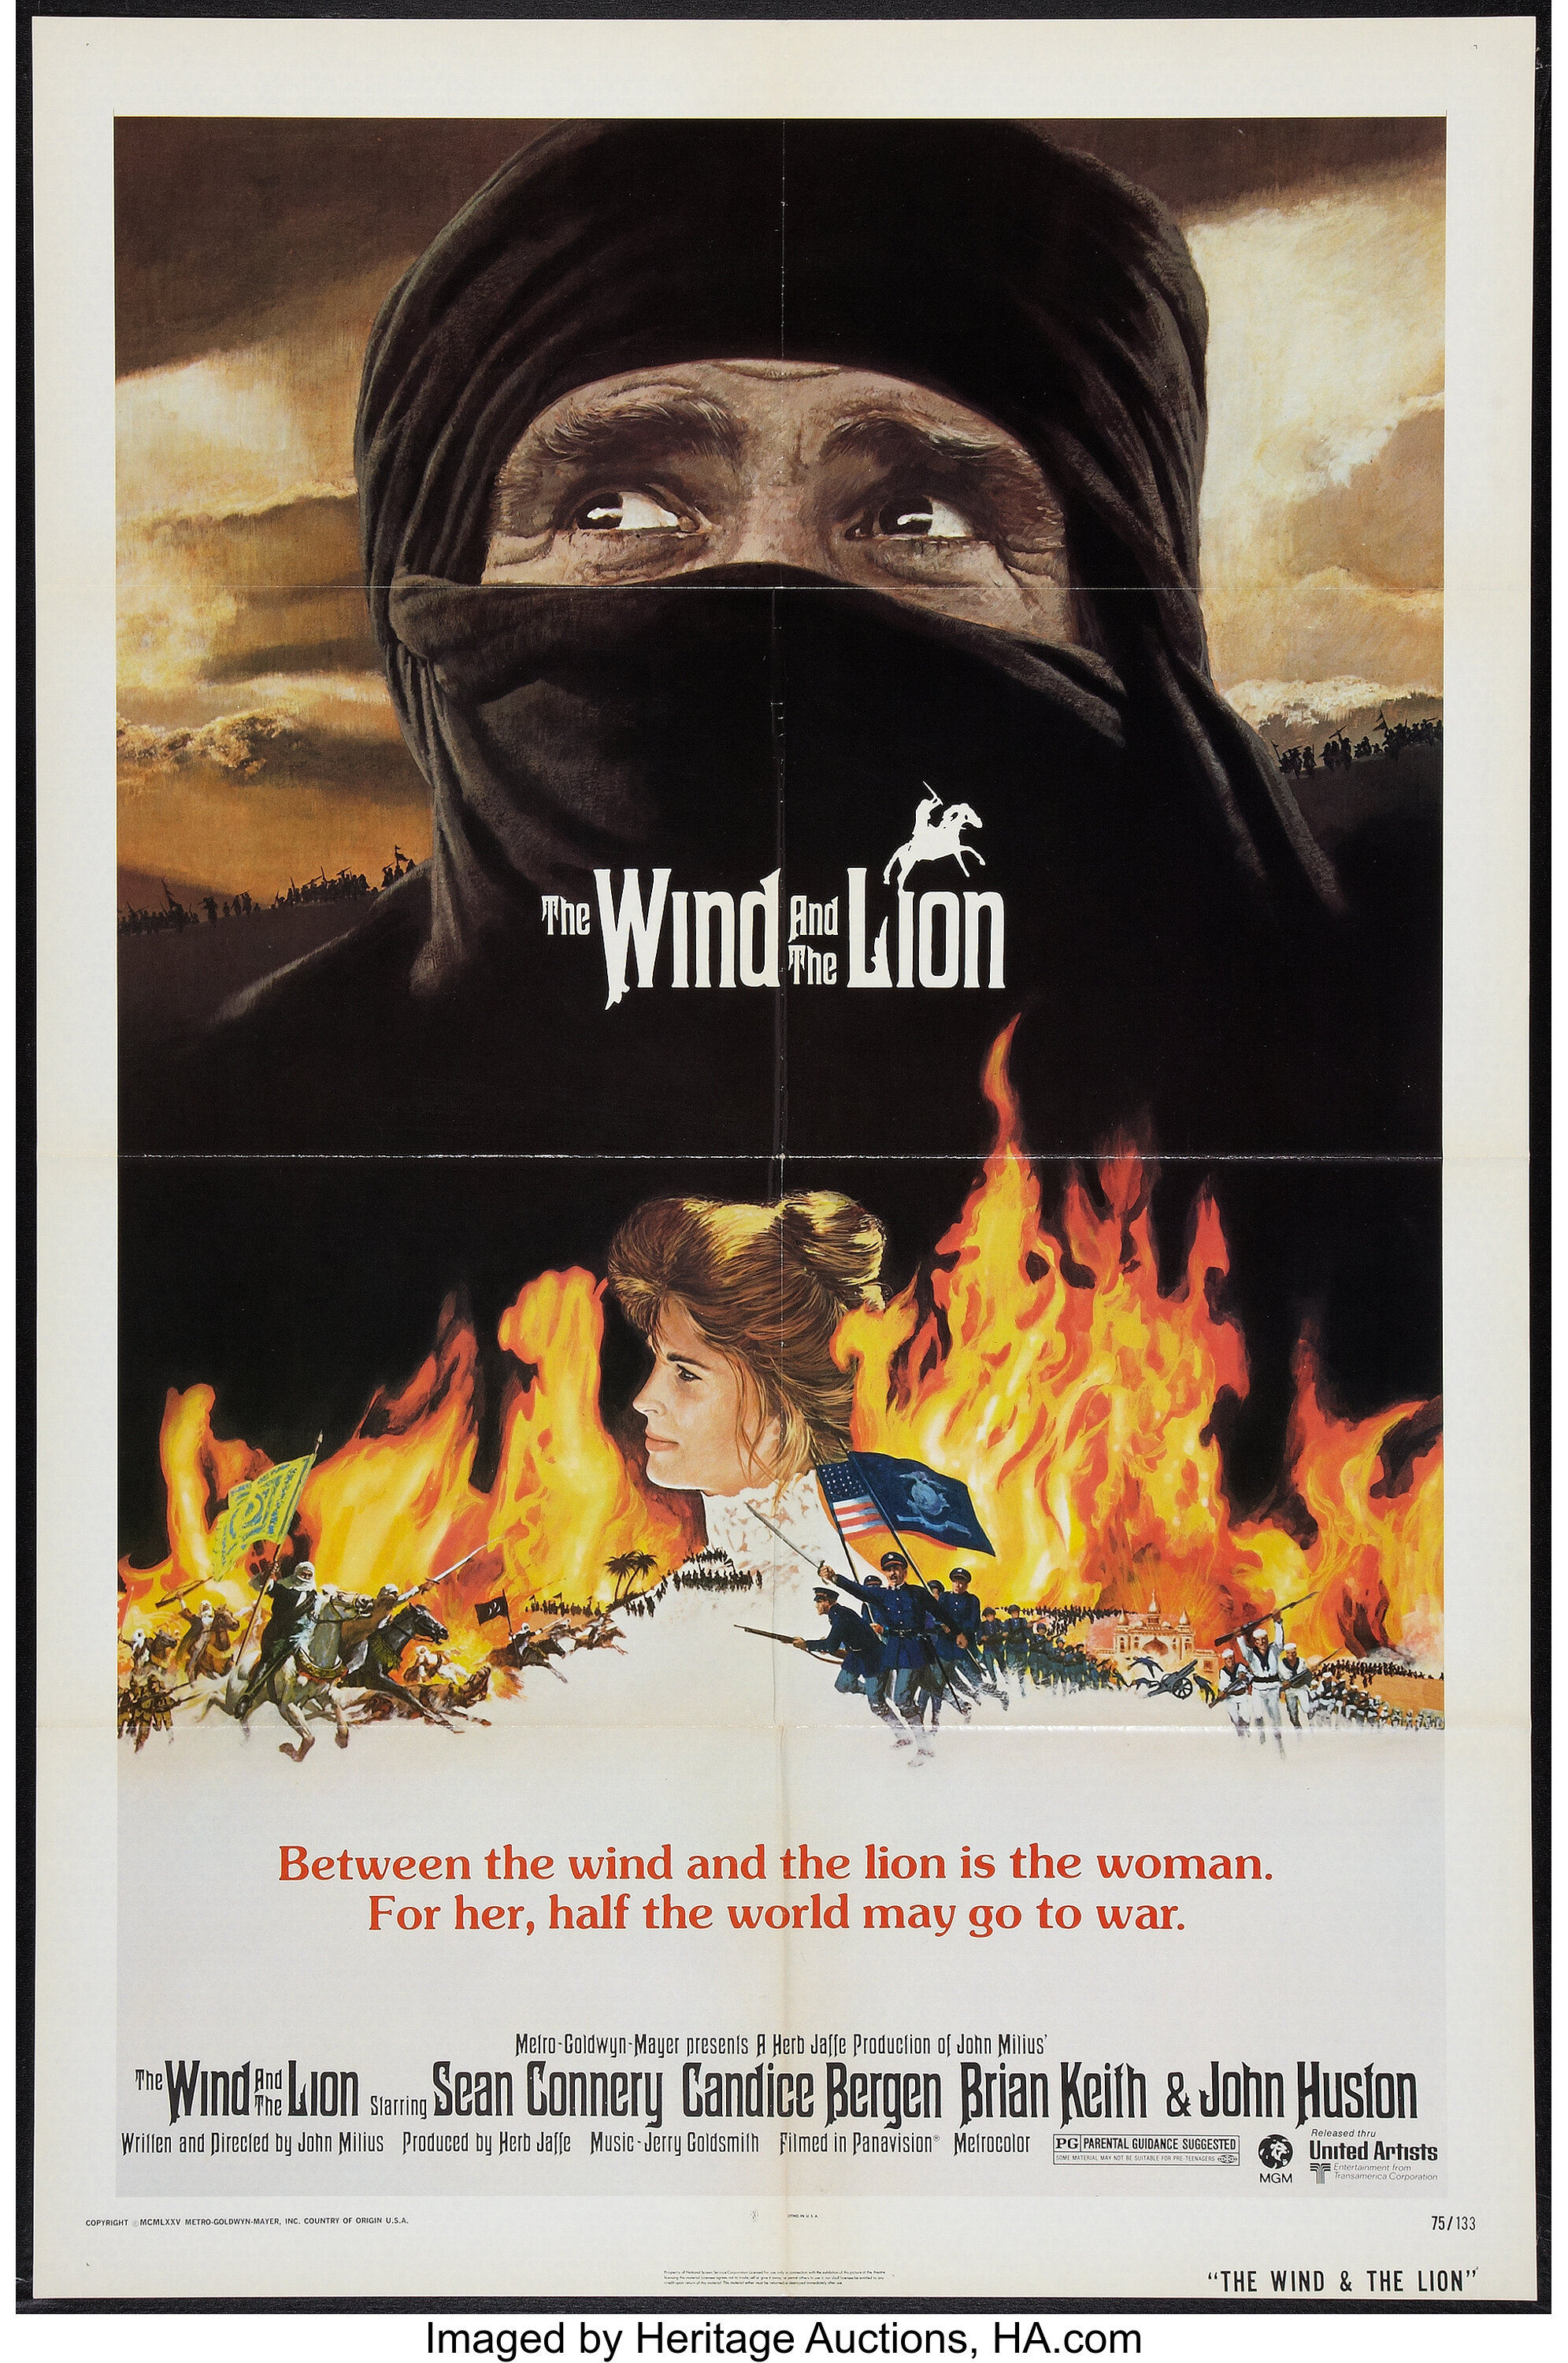 Search: The Wind and the Lion [54 790 231]